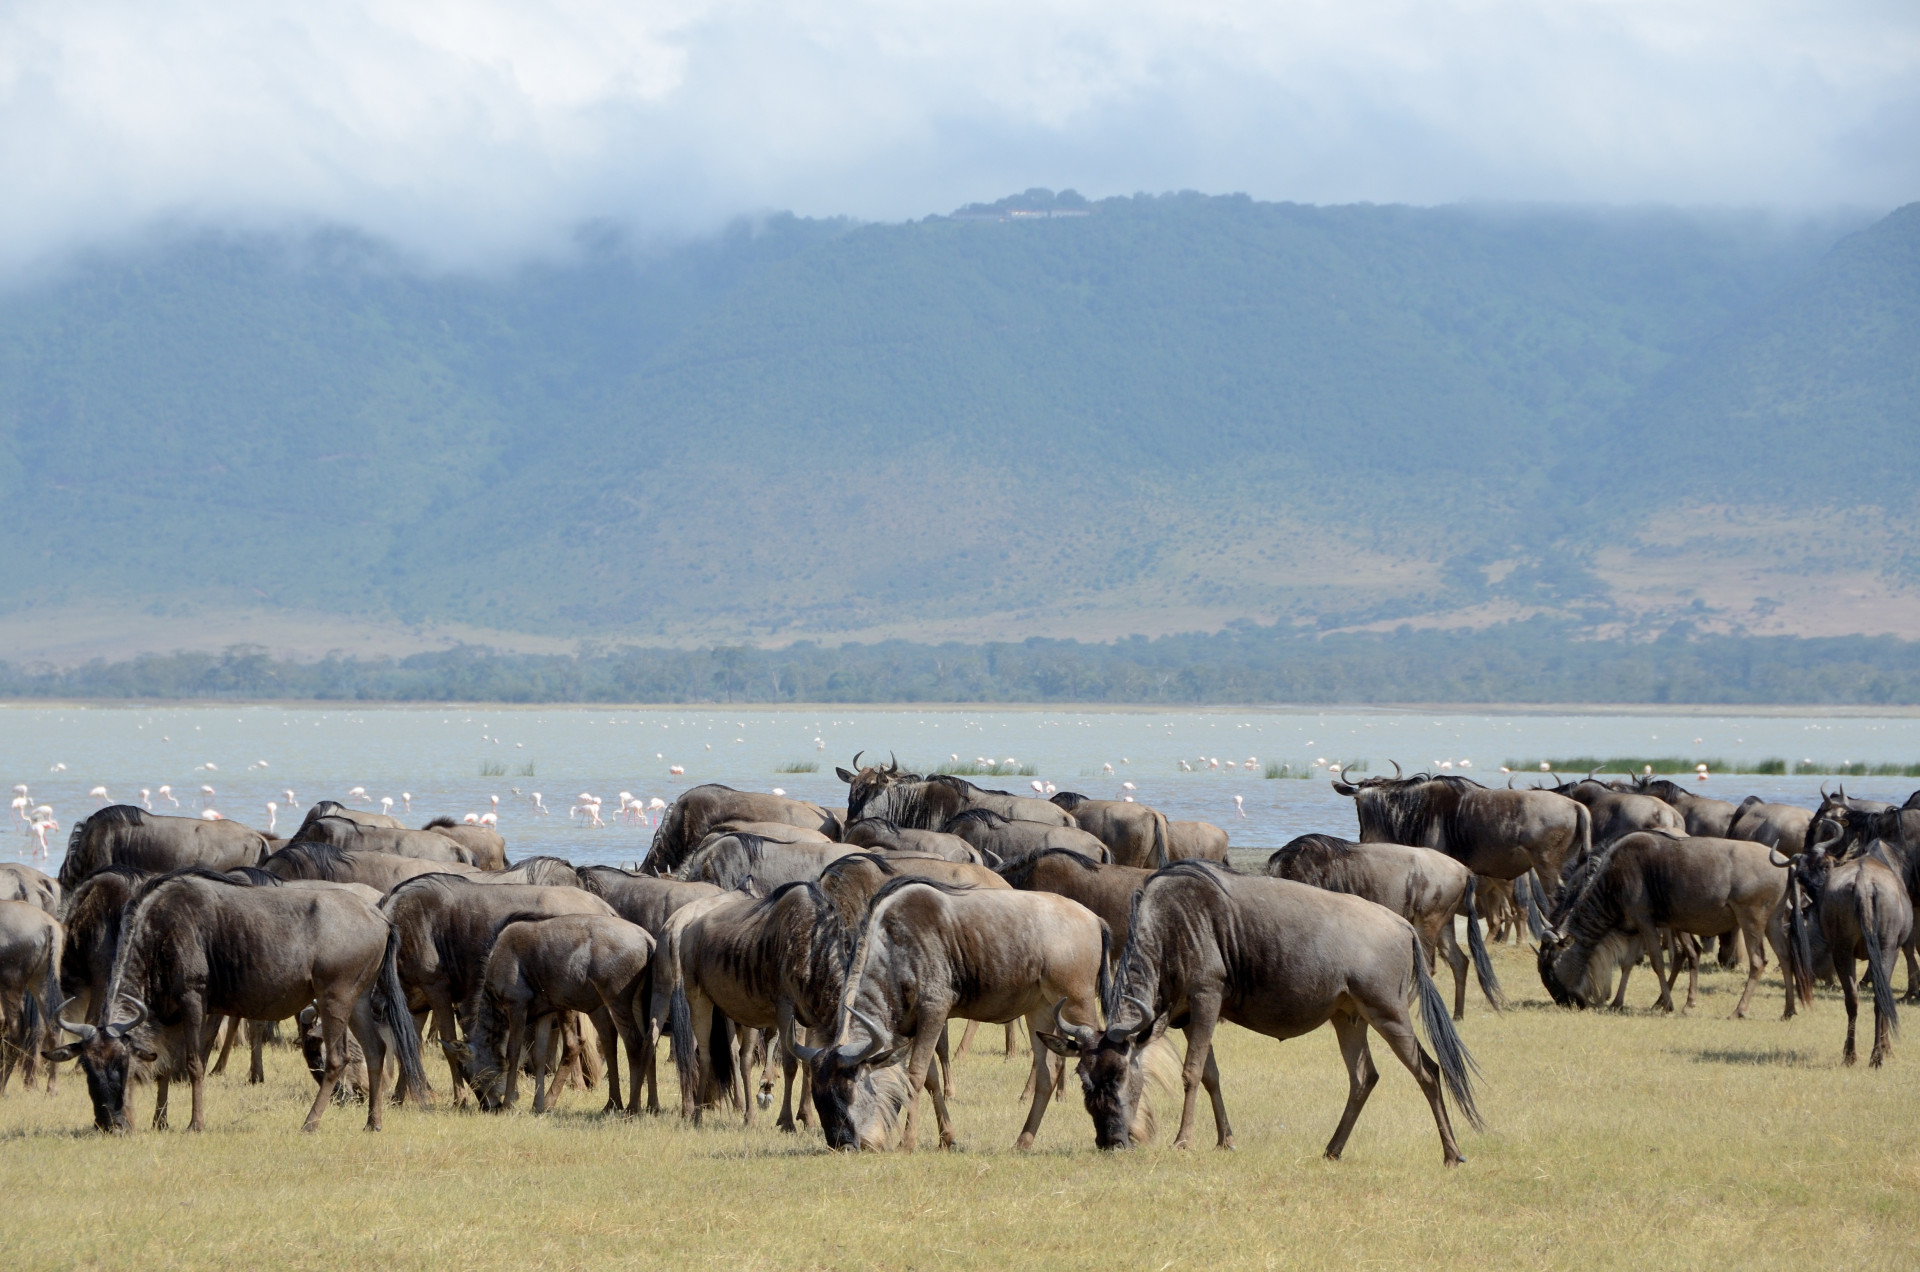 In addition, you can contemplate beautiful landscapes as well as the famous wildebeest migration routes. May and June are the best months to go on this safari.<p><a href="https://www.msn.com/en-us/community/channel/vid-7xx8mnucu55yw63we9va2gwr7uihbxwc68fxqp25x6tg4ftibpra?cvid=94631541bc0f4f89bfd59158d696ad7e">Follow us and access great exclusive content every day</a></p>